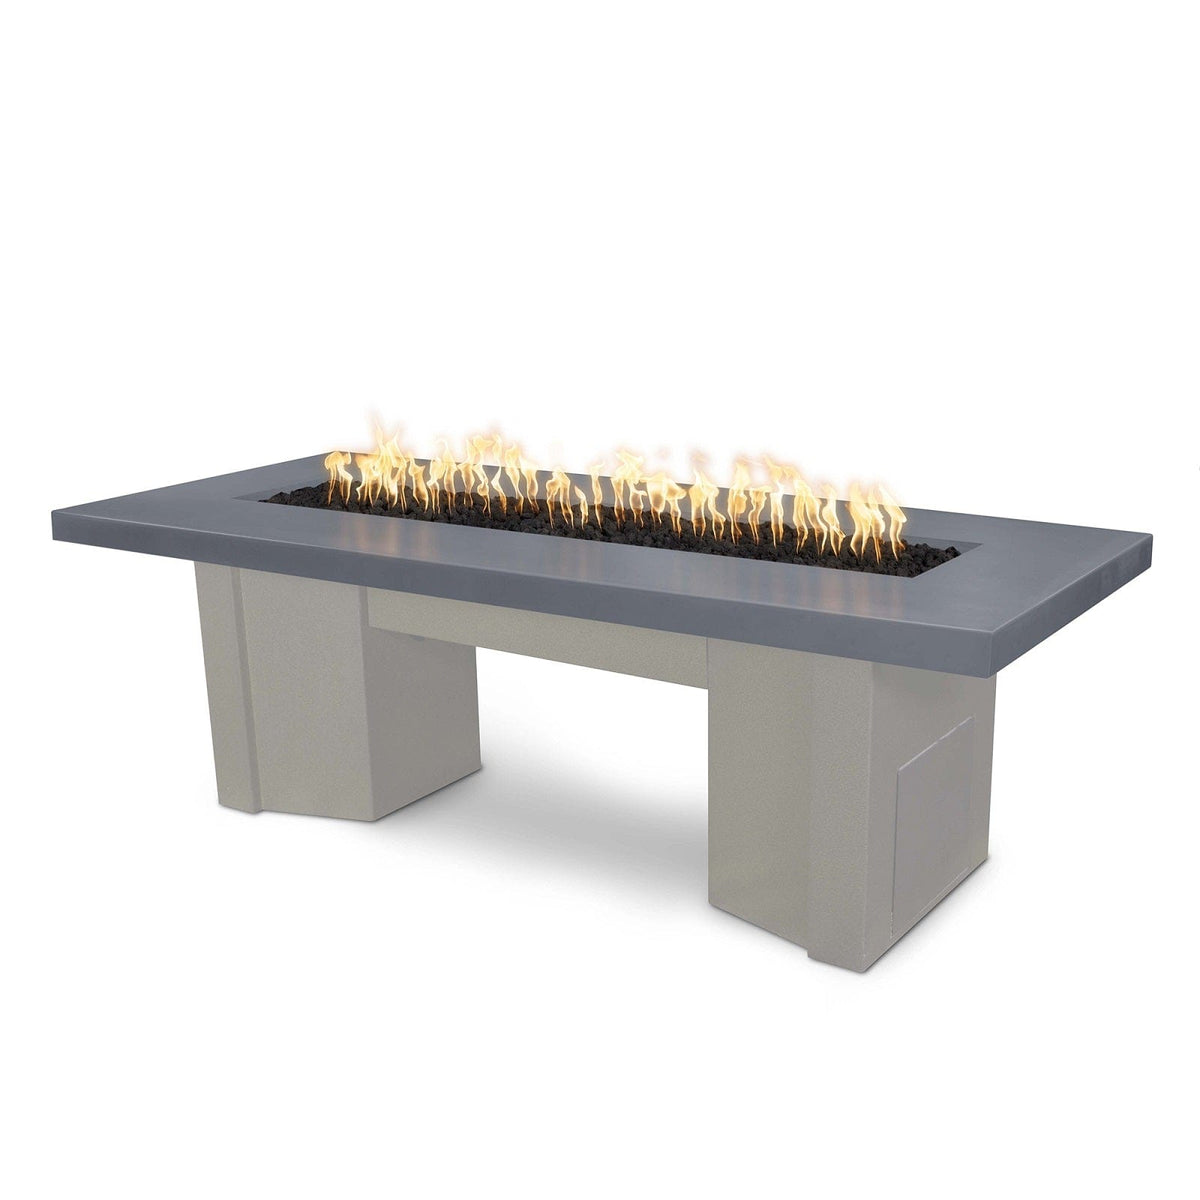 The Outdoor Plus Fire Features Gray (-GRY) / Pewter Powder Coated Steel (-PEW) The Outdoor Plus 78&quot; Alameda Fire Table Smooth Concrete in Liquid Propane - Match Lit / OPT-ALMGFRC78-LP